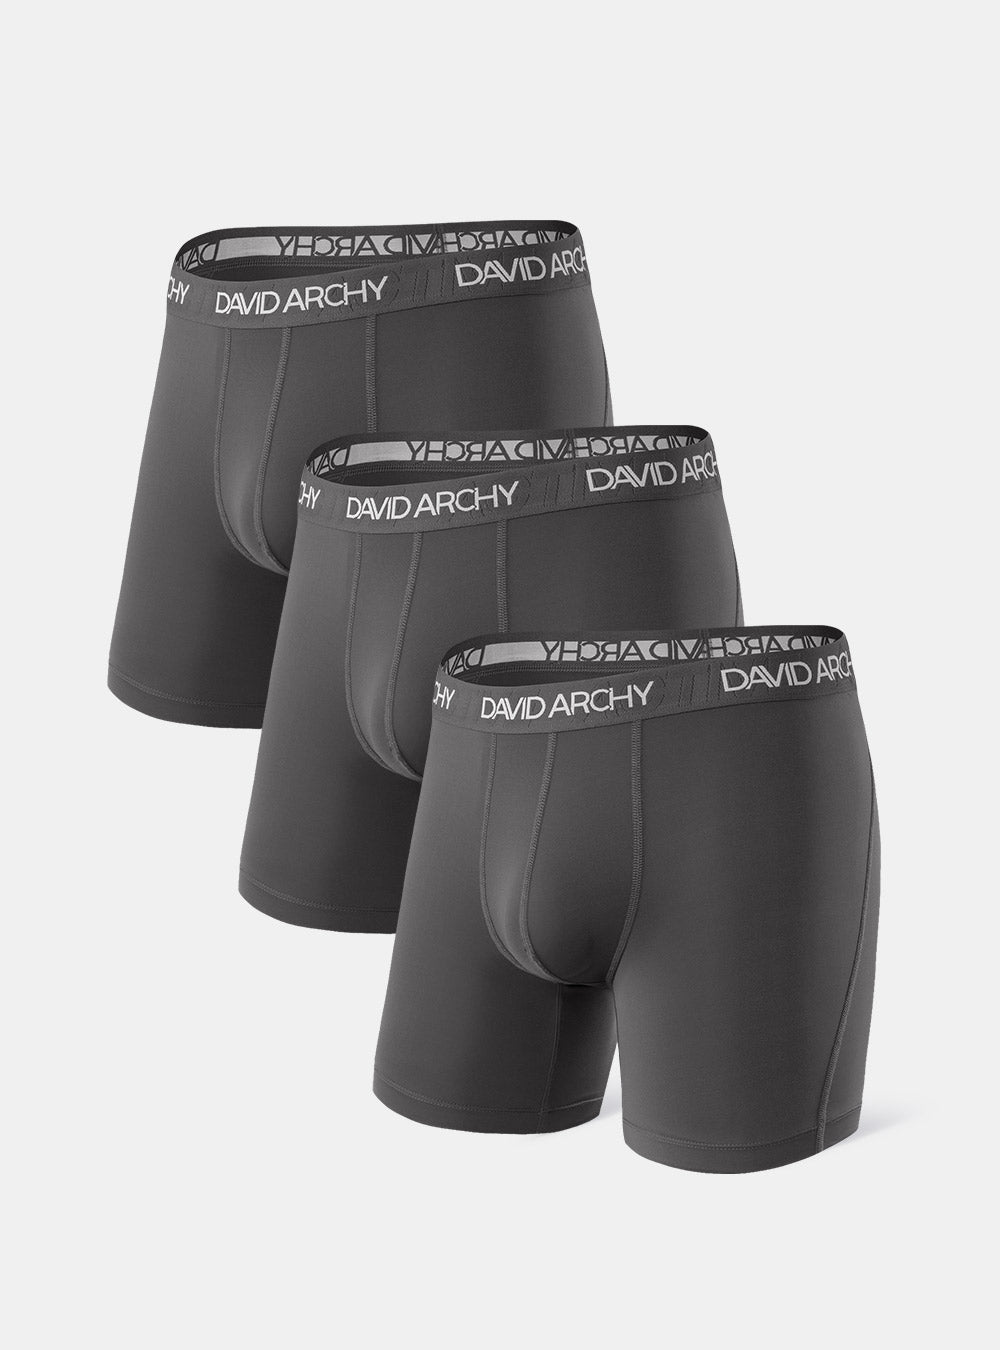 MODELING MEN'S UNDERWEAR! Quick Dry Mesh Dual Pouch Technology by